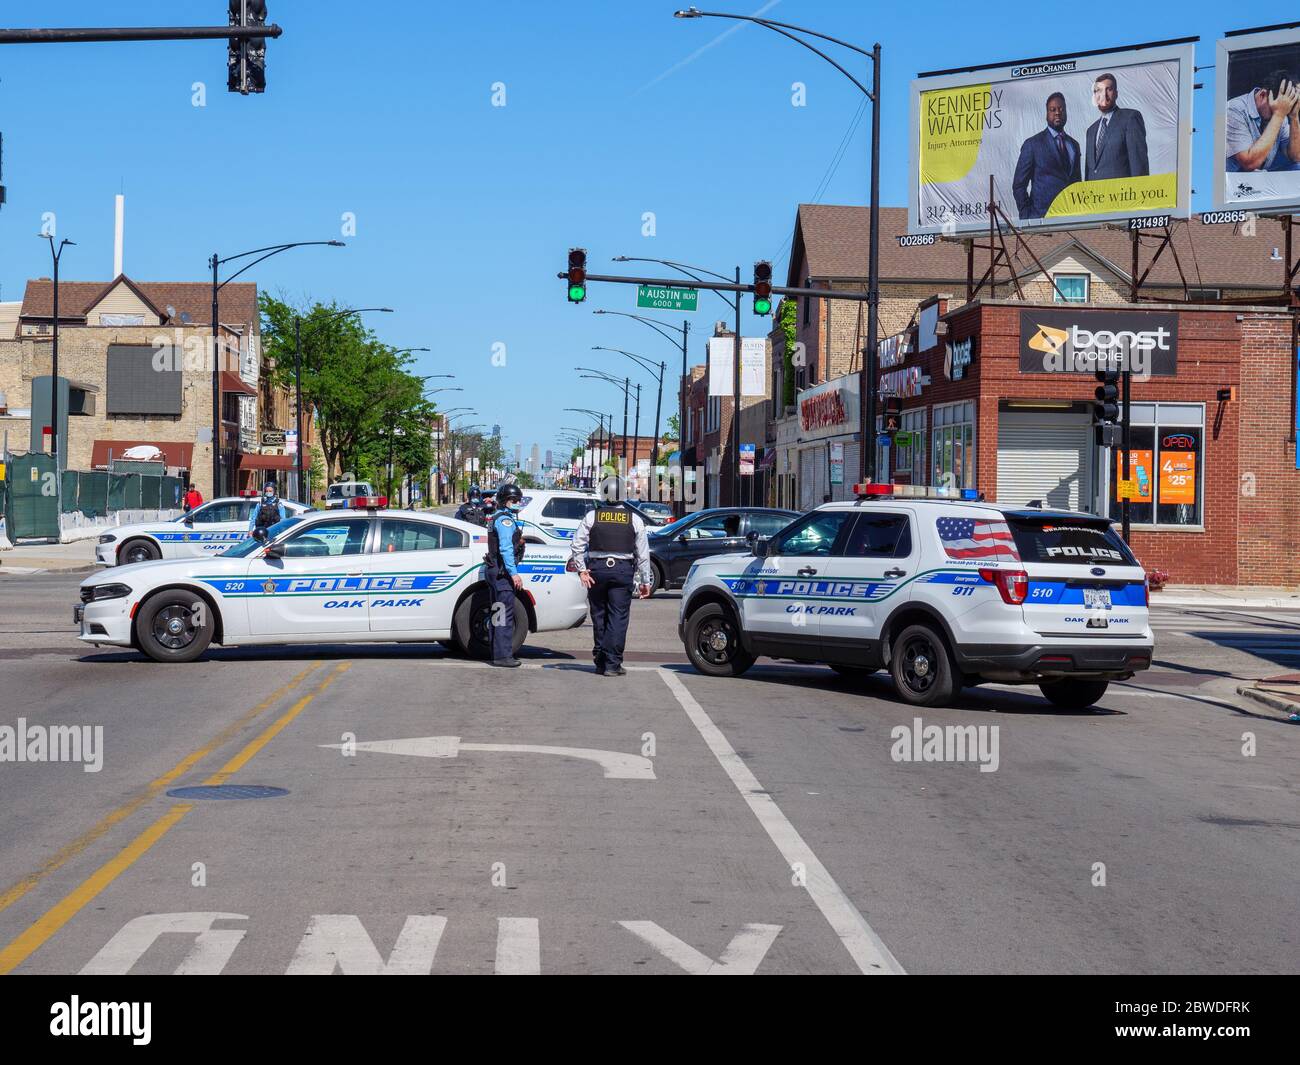 Oak Park, Illinois. 31st August 2020. Oak Park Police officers and vehicles block Chicago Avenue at Austin Boulevard, the border with the City of Chicago. Chicago Police requested closure of the street due to civil unrest resulting from protests of the death of George Floyd, a black man killed by a Minneapolis, Minnesota policeman, who has been charged with murder. This view is to the east from Oak Park into the city. Stock Photo